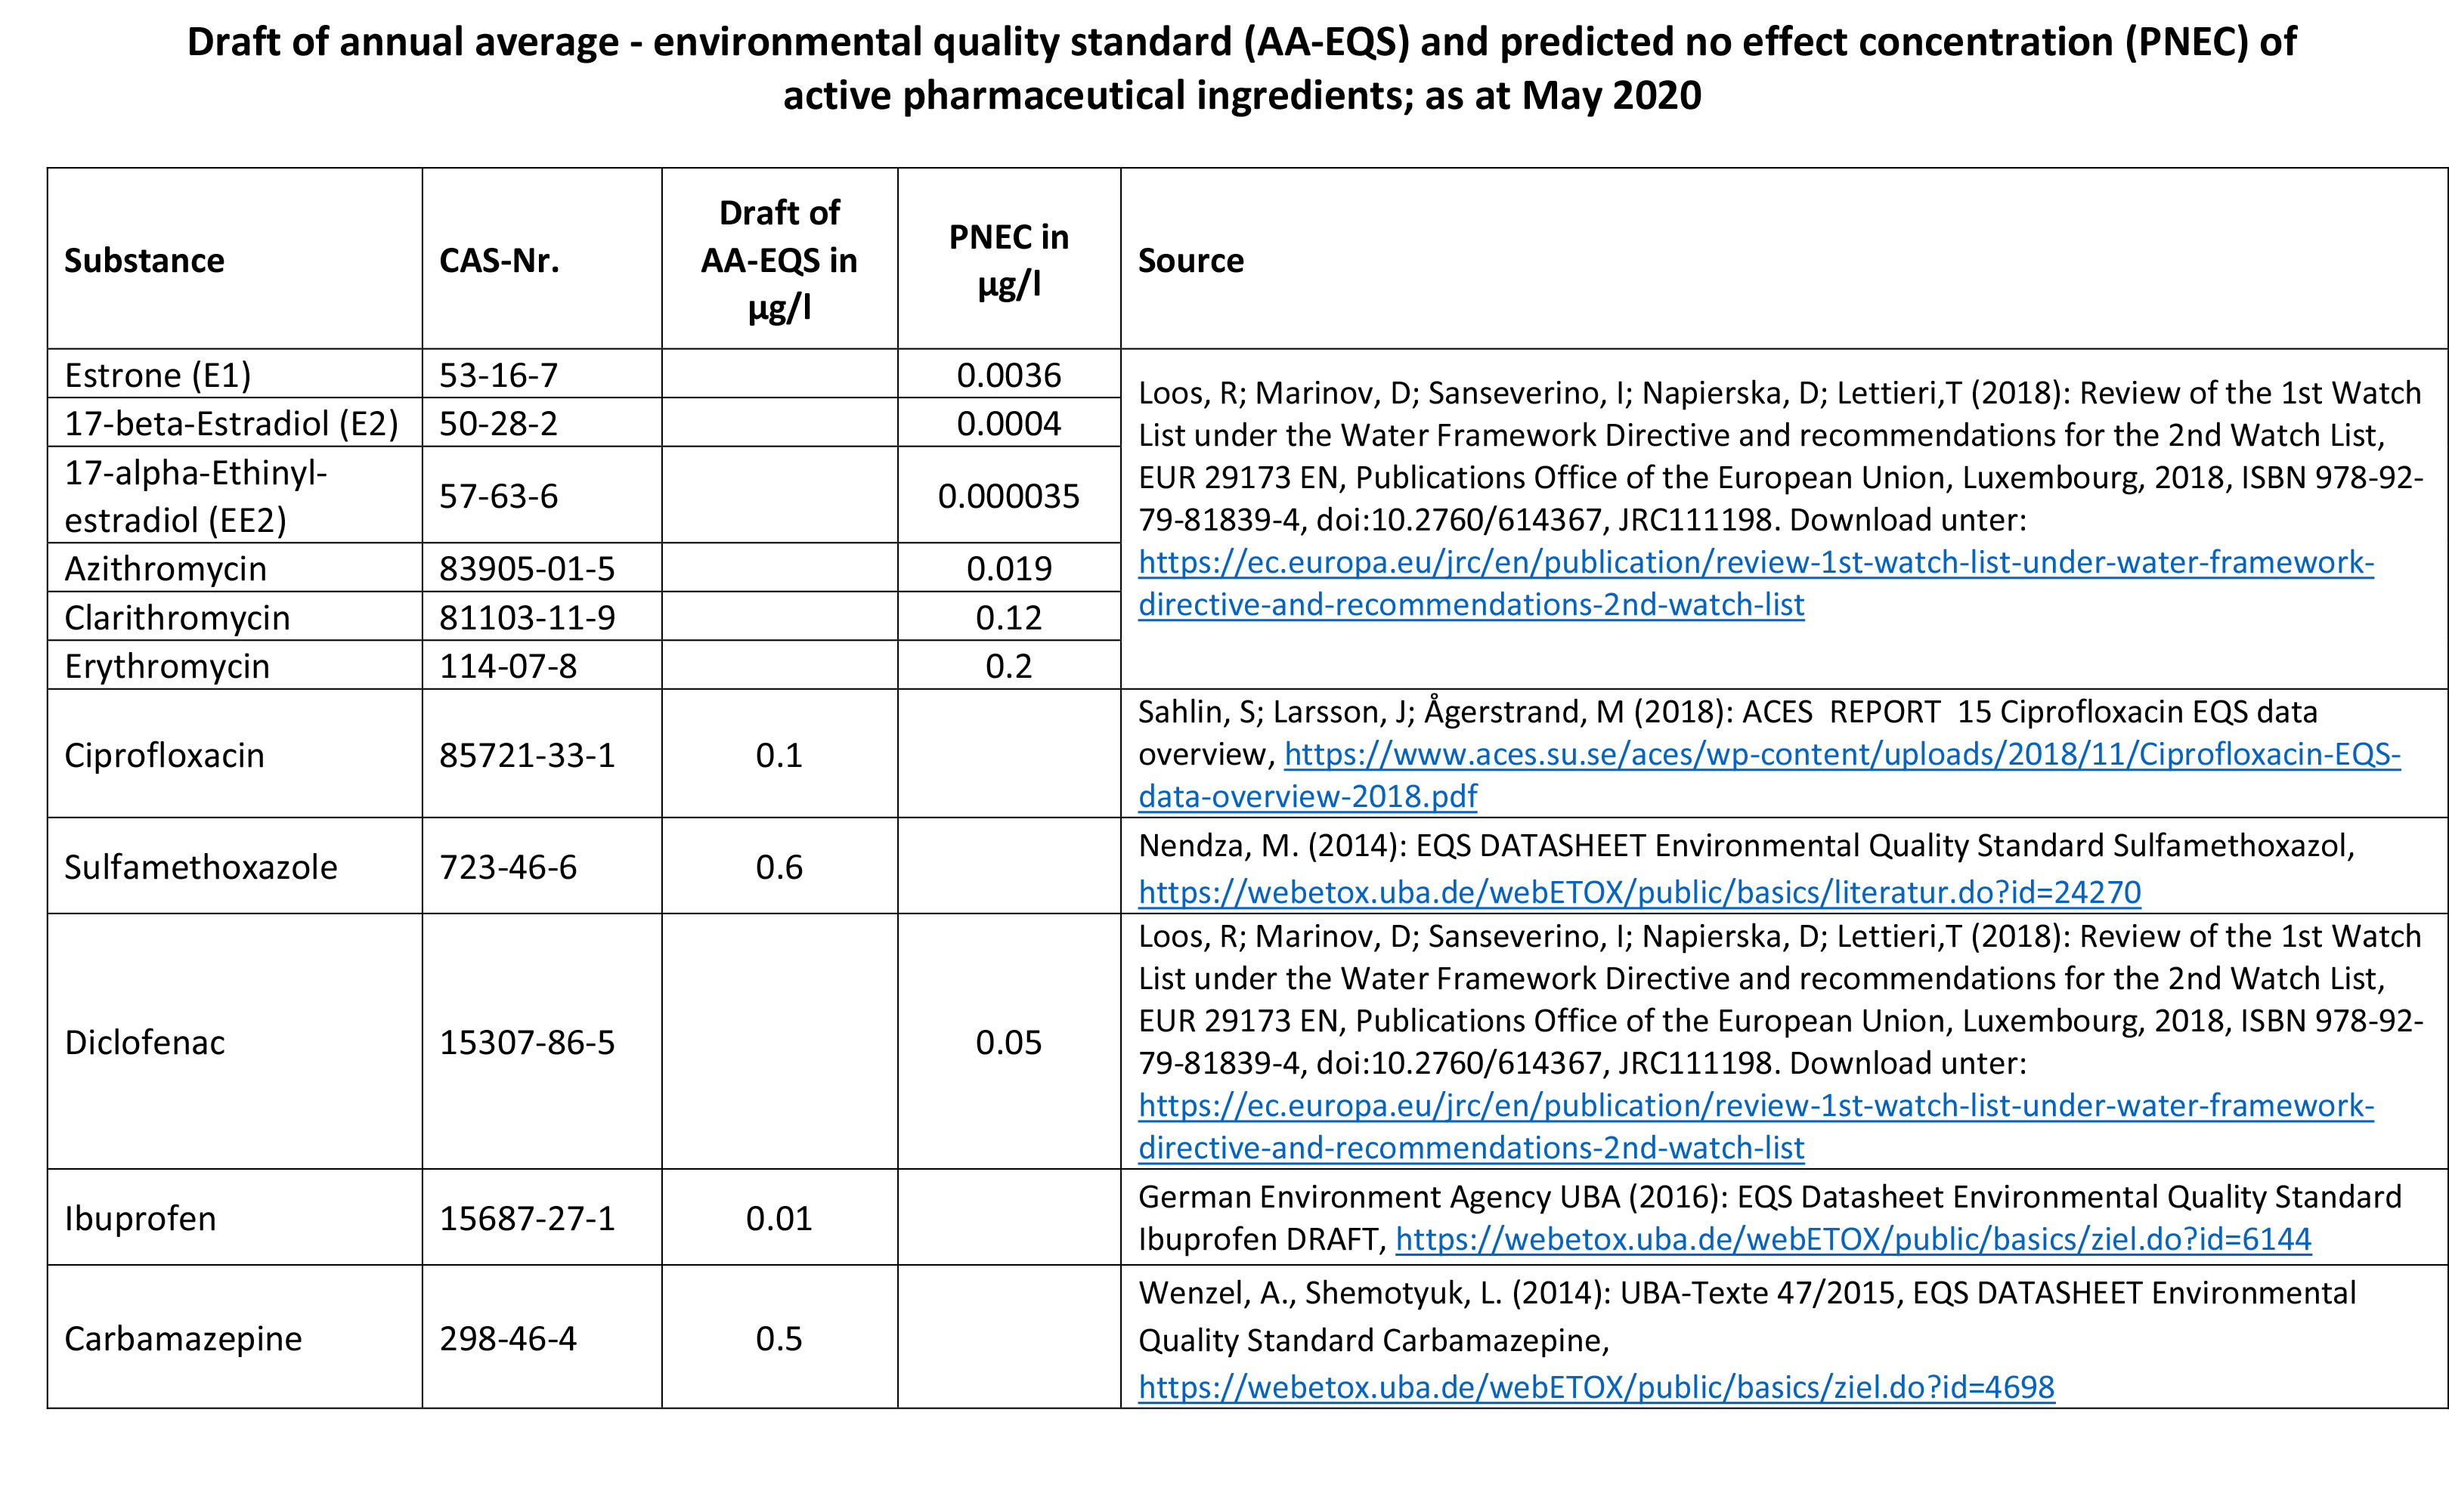 Draft of annual average - environmental quality standard (AA-EQS) and predicted no effect concentration (PNEC) of active pharmaceutical ingredients; as at May 2020